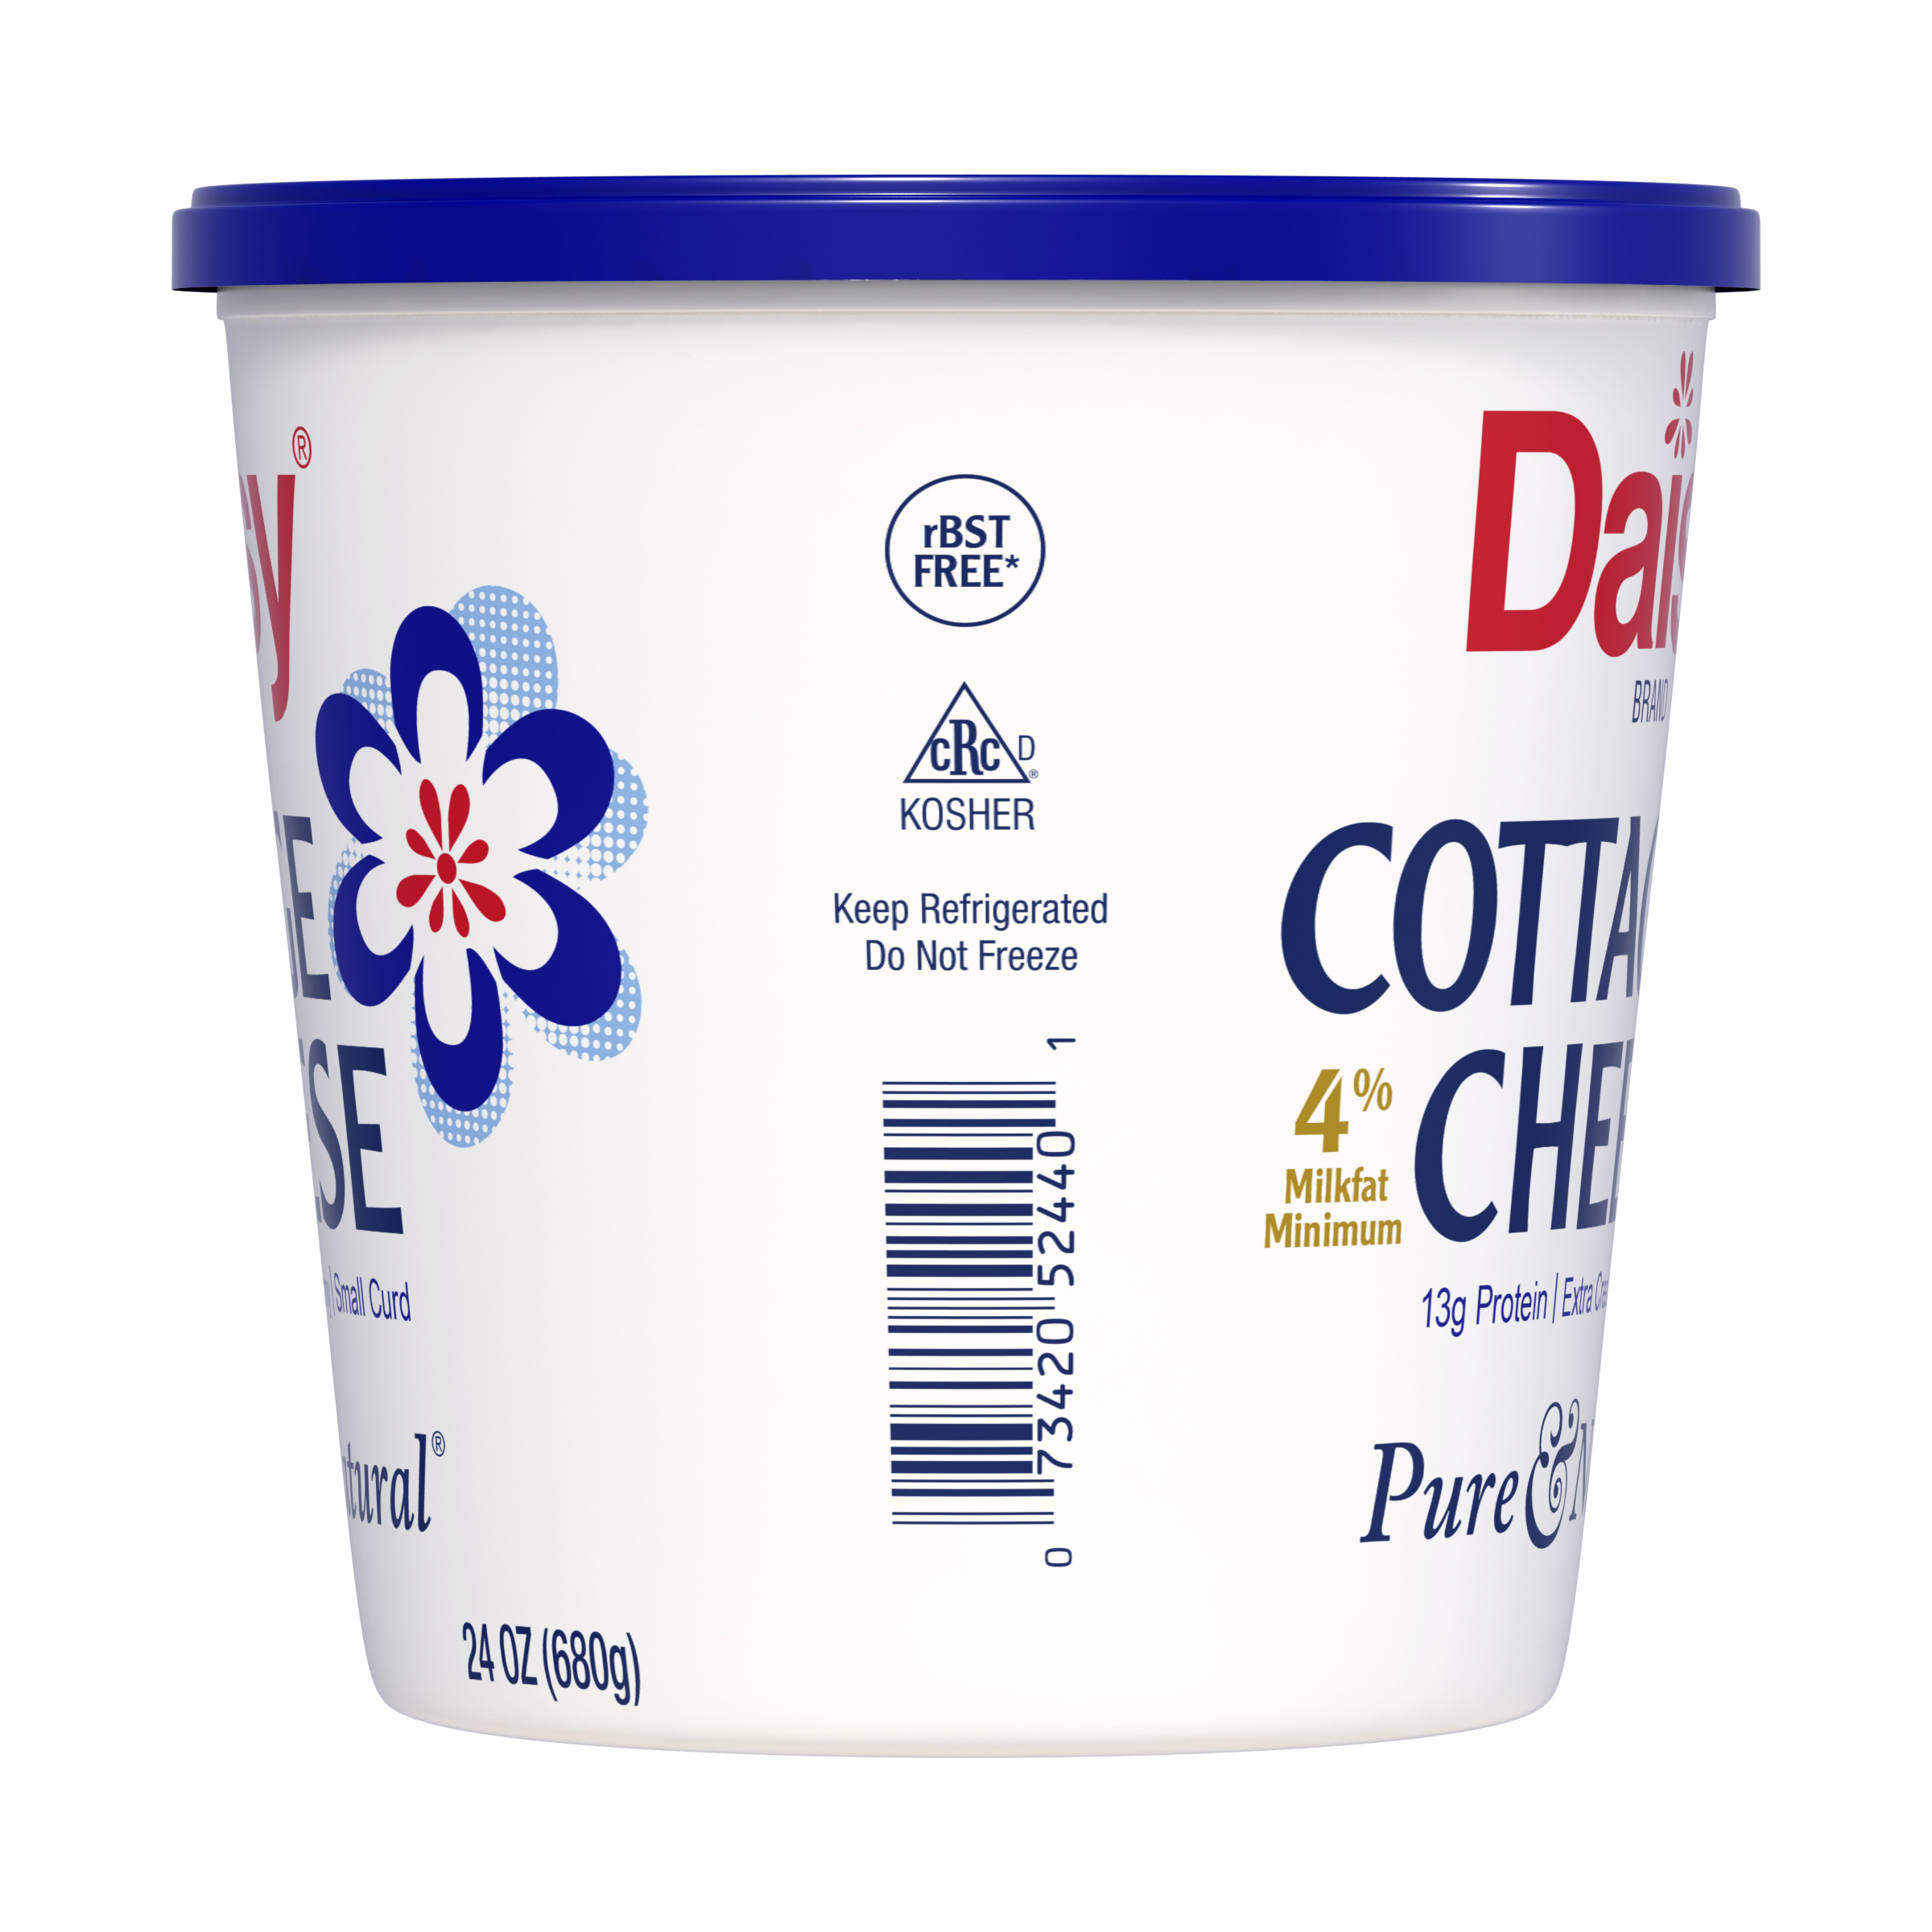 Daisy Pure and Natural Cottage Cheese, 4% Milkfat, 24 oz (1.5 lb) Tub (Refrigerated) - 13g of Protein per serving - image 5 of 10